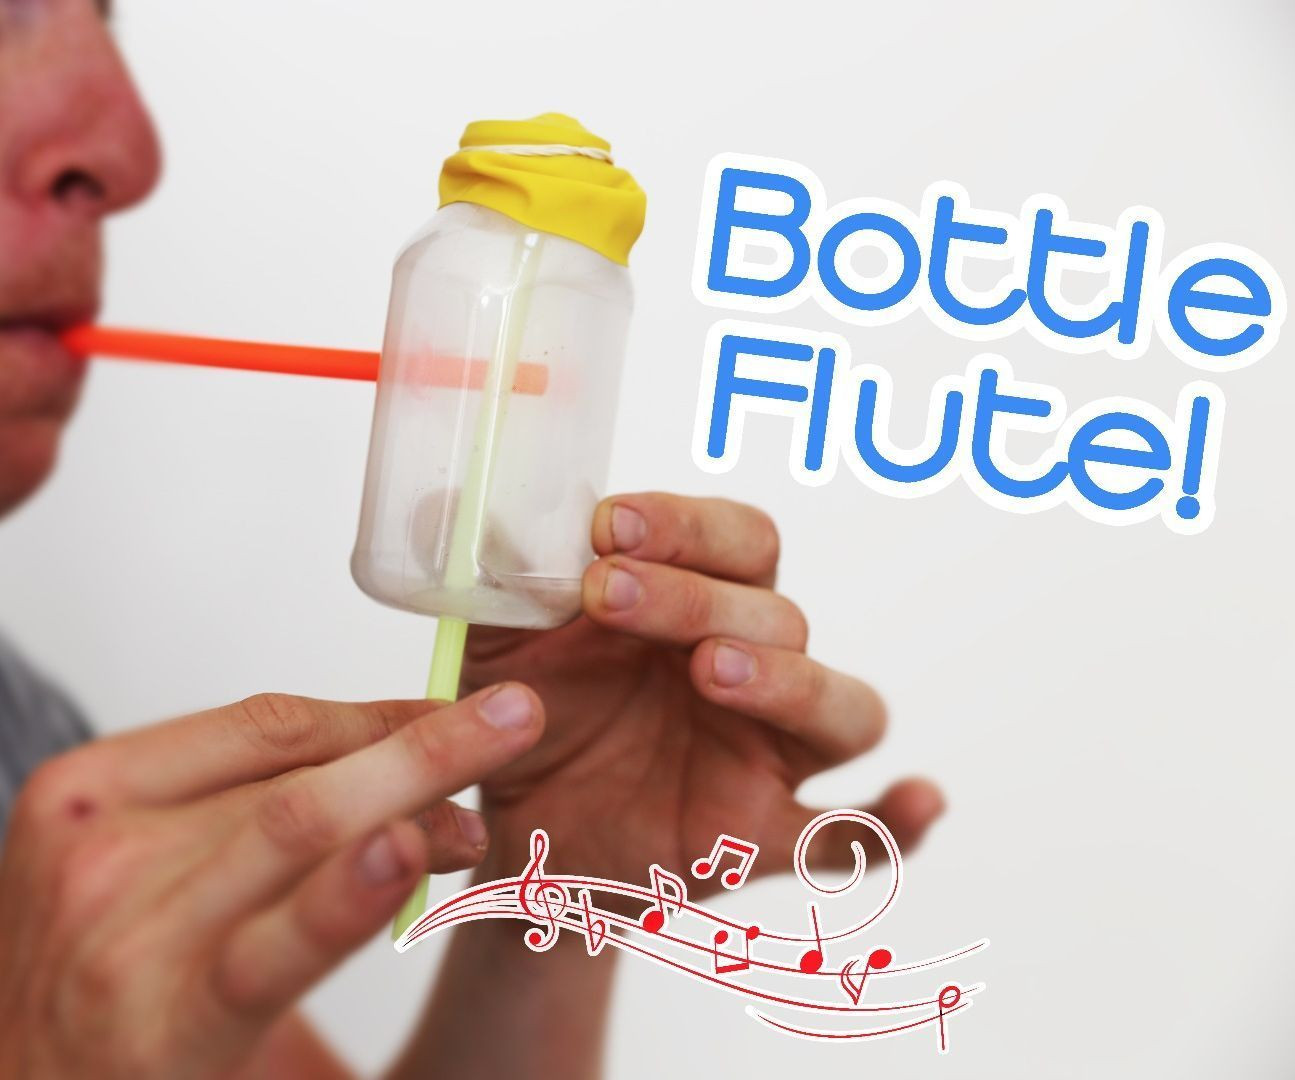 DIY Musical Instruments For Adults
 Bottle Boogie Flute Projects to Try